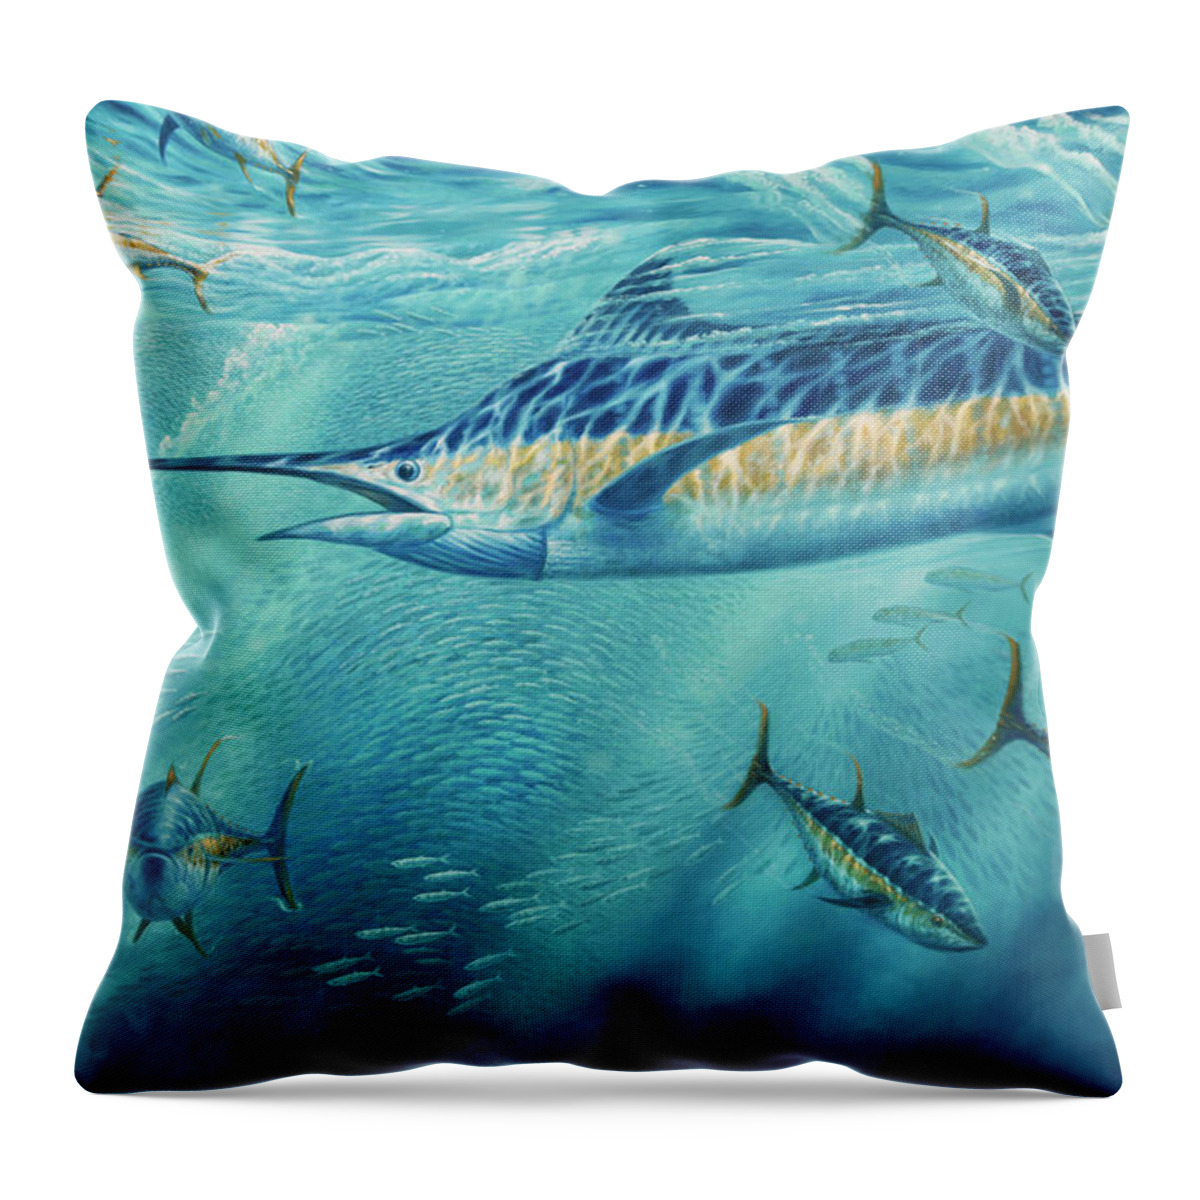 Blue Marlin Paintings Throw Pillow featuring the painting Party Crasher by Guy Crittenden